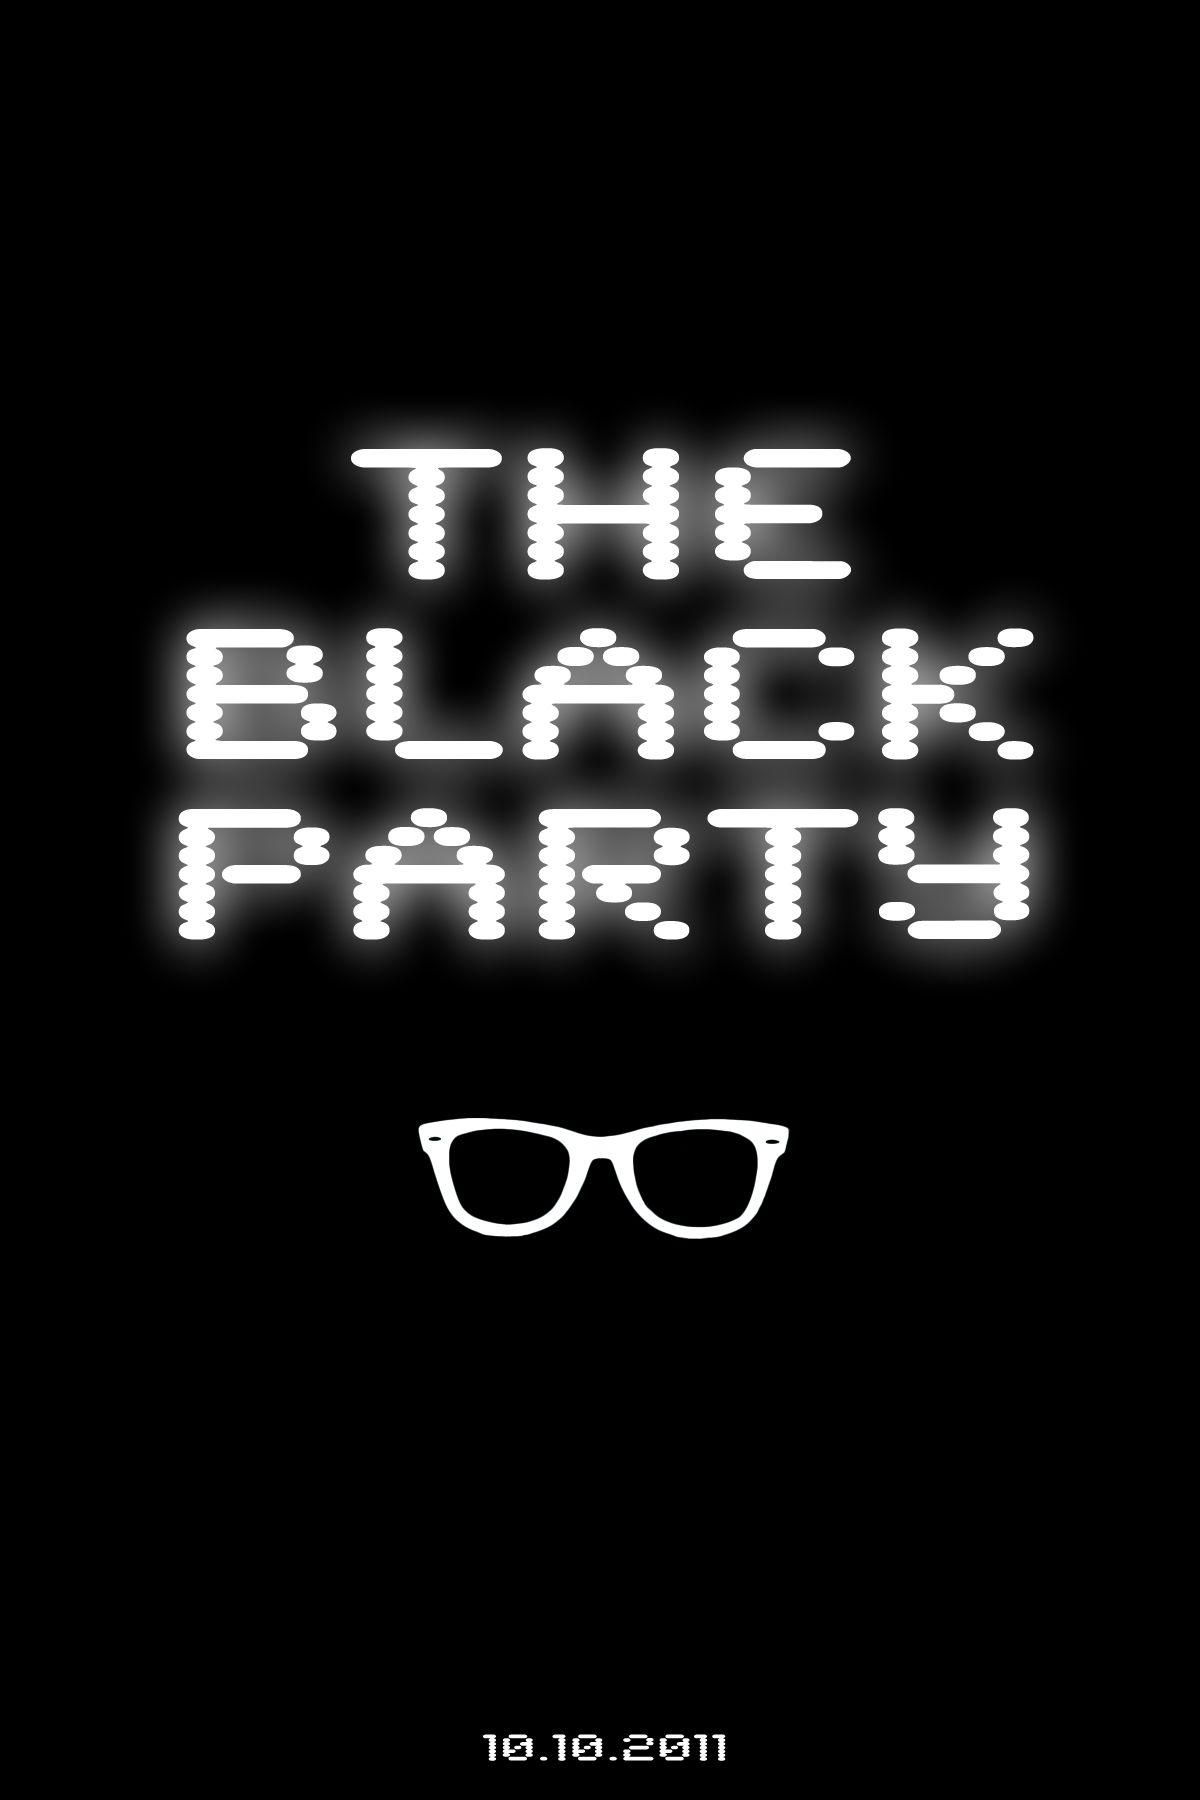 Black Party Logo - The Black Party 2011. The Architecture Society